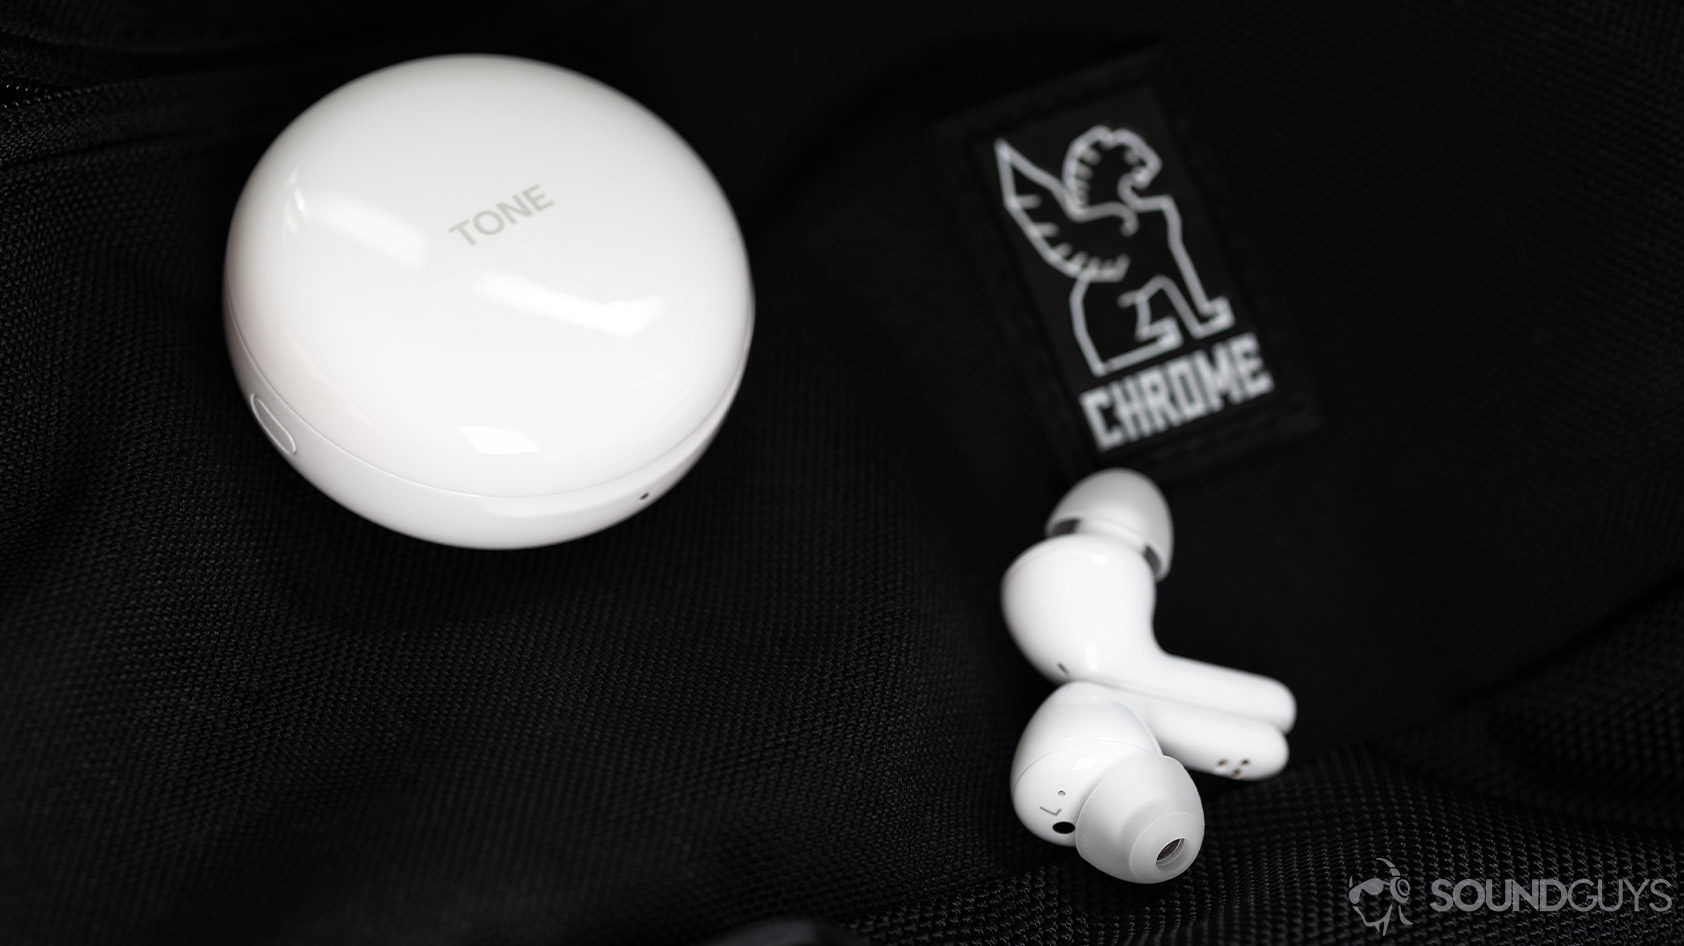 A photo of the LG TONE Free HBS-FN6-6 true wireless earbuds outside of the charging case showing the dedicated soft ear tips with the circular case in the background.